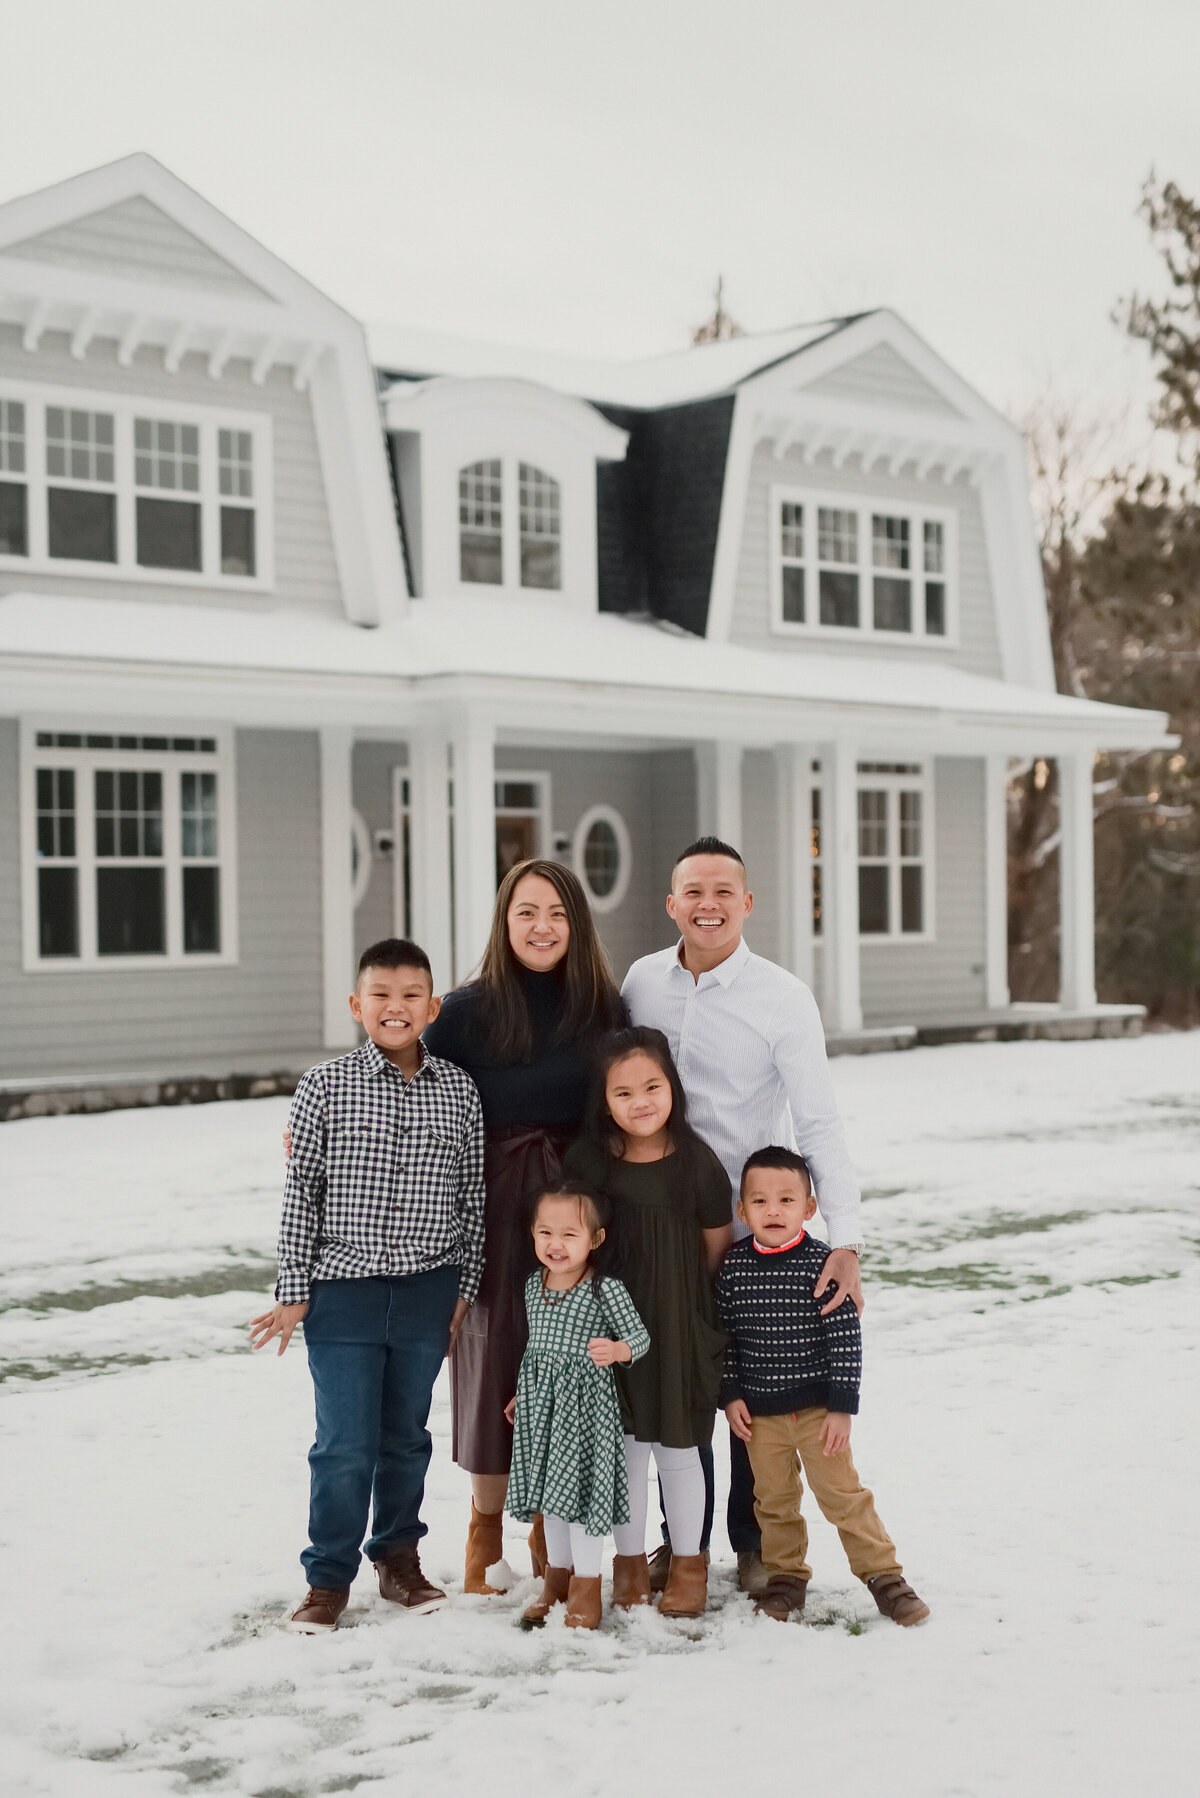 boston-portrait-photographer-family-portraits-home-lifestyle-holiday-snow-new-england-christmas-pictures-family-outside-house